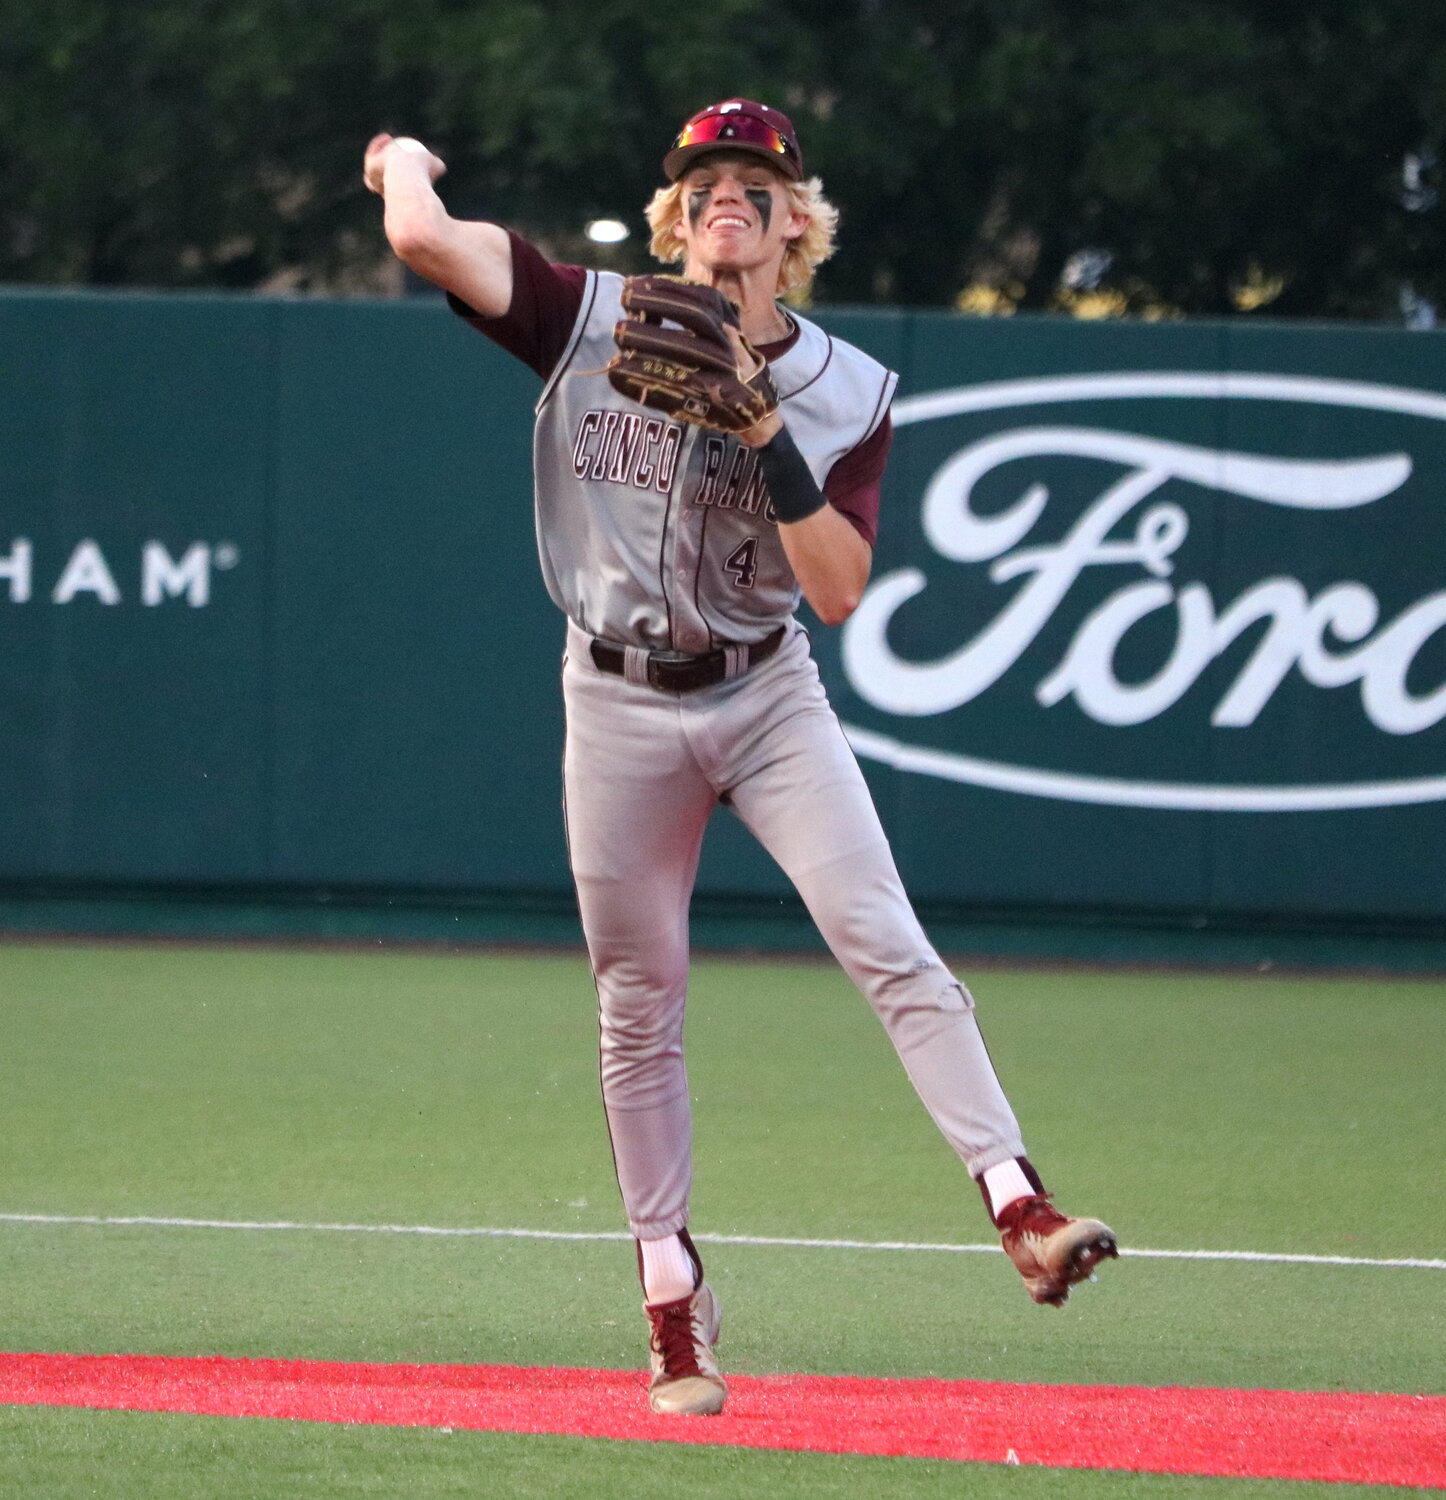 Brock DeYoung throws to first during Friday's regional semifinal between Cinco Ranch and Pearland at The University of Houston.